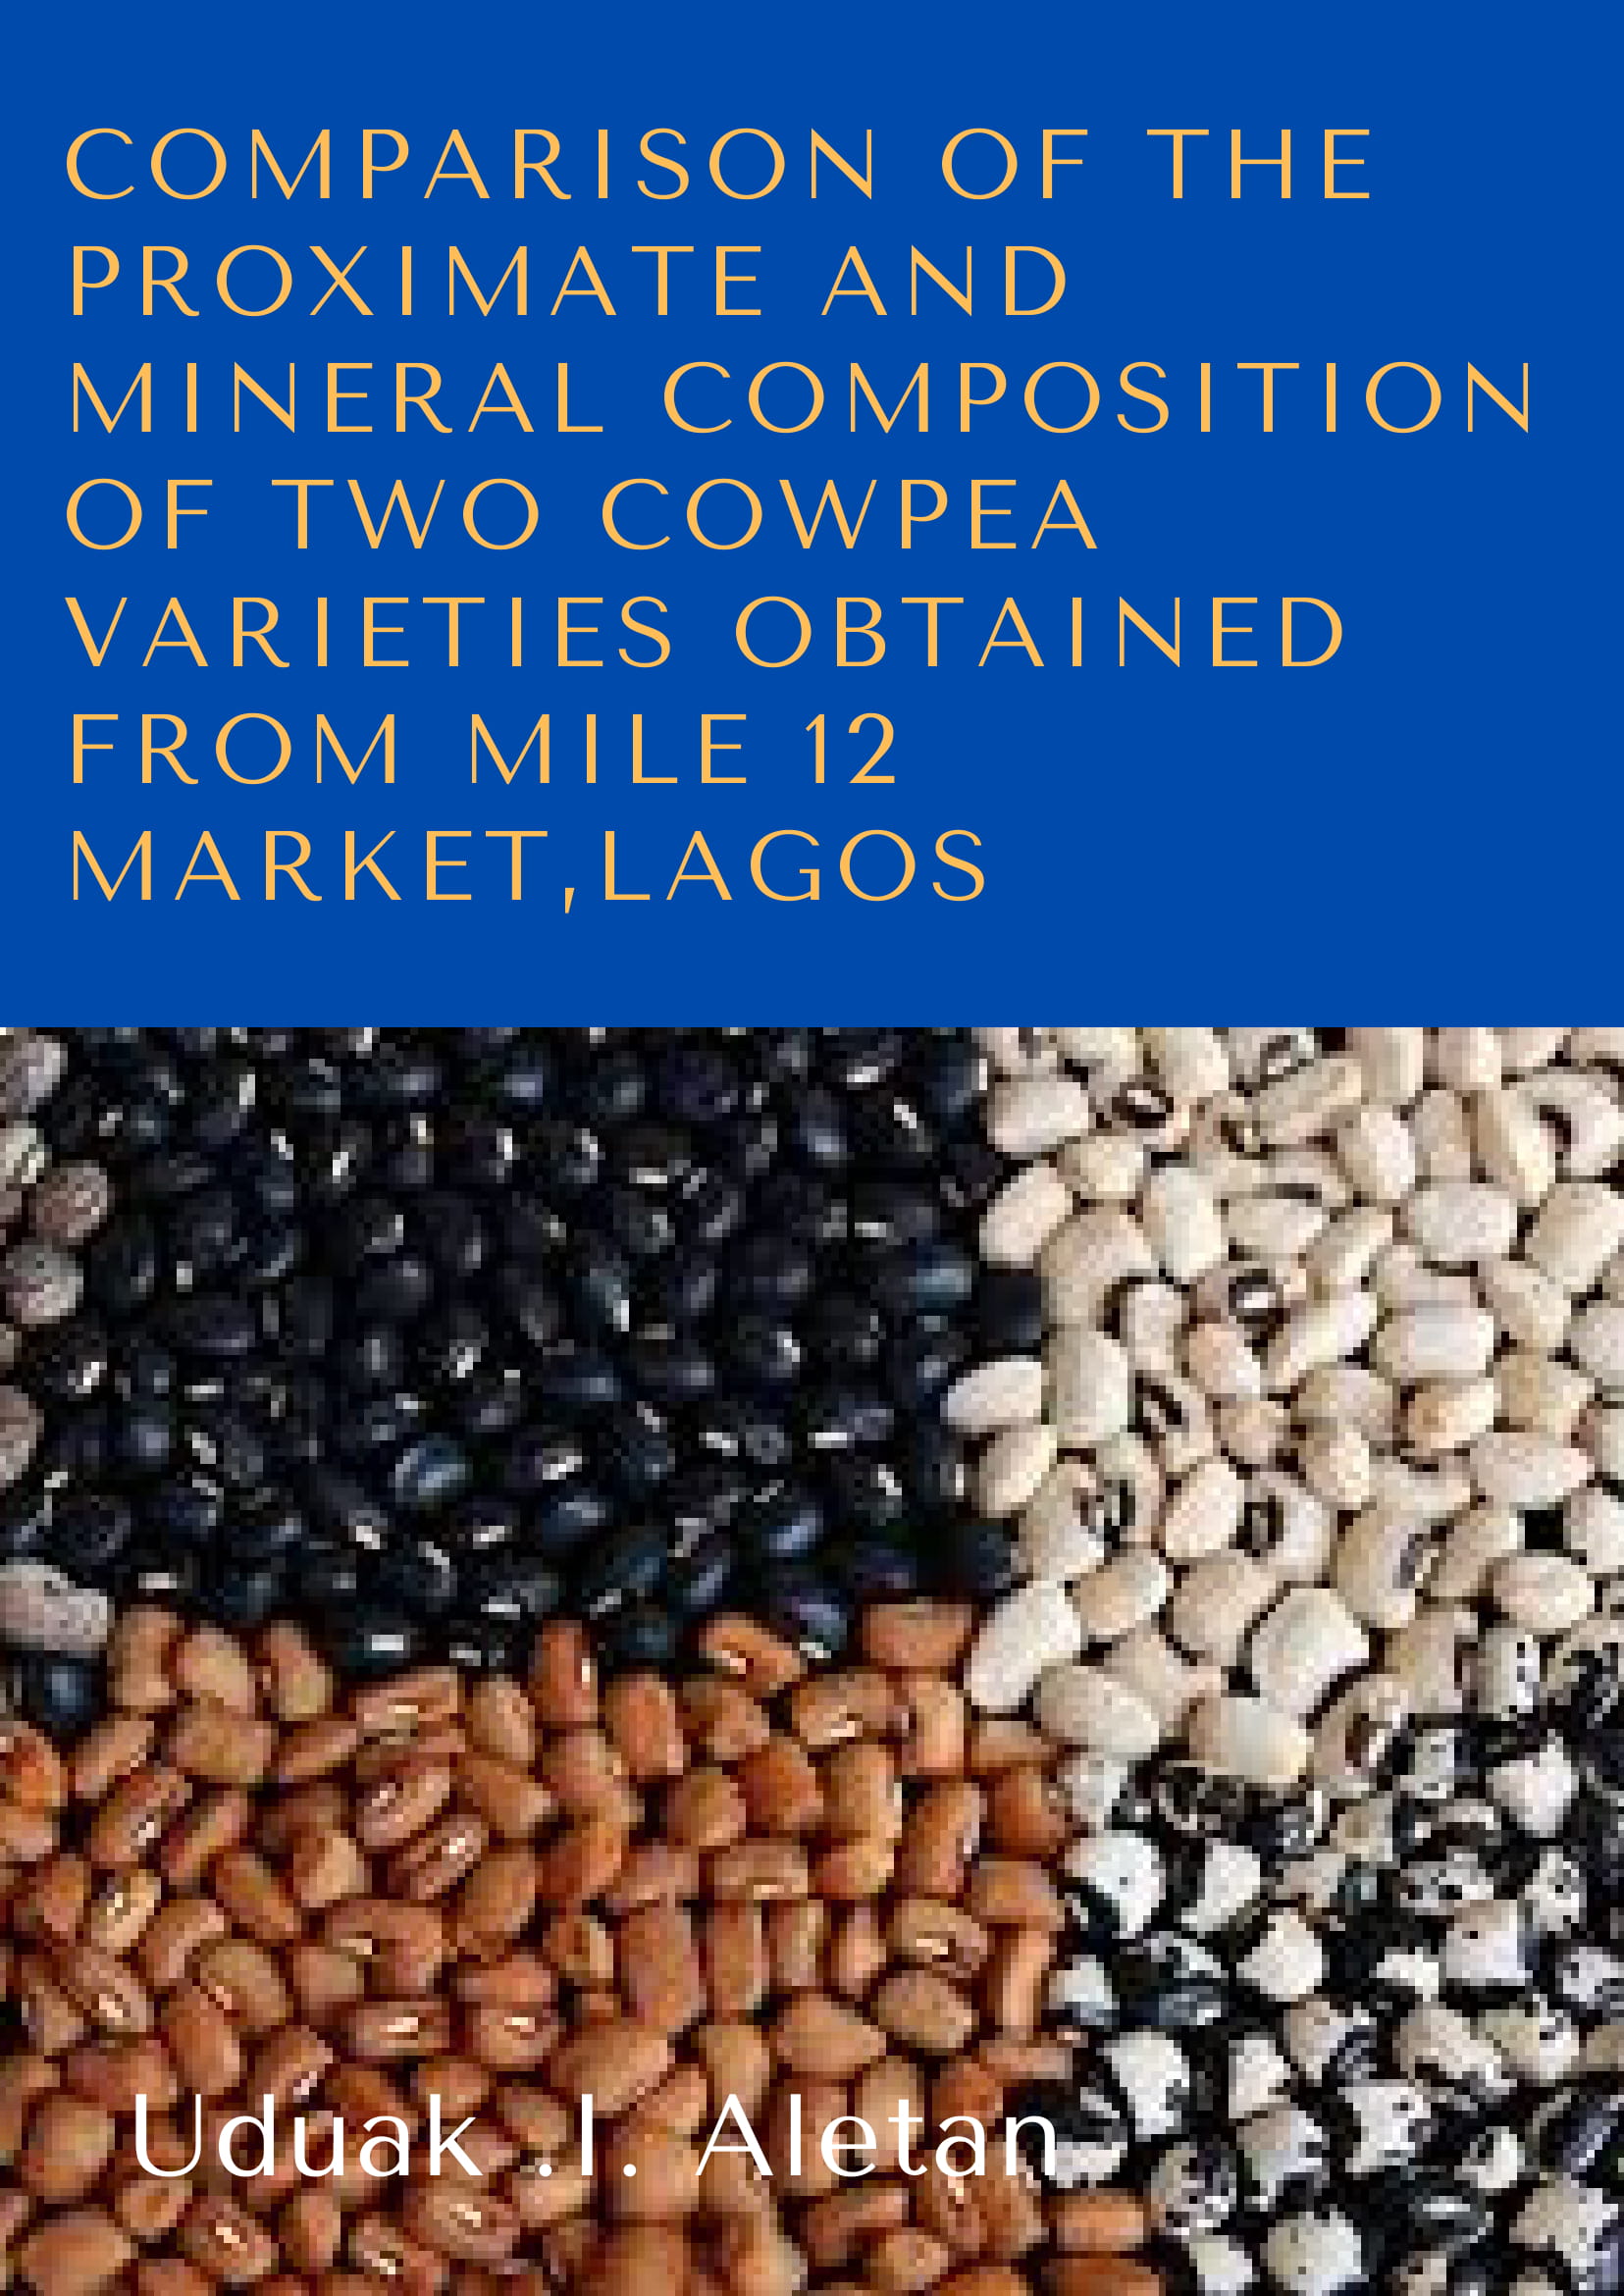 Comparison of the Proximate and Mineral Composition of two Cowpea Varieties obtained from Mile 12 Market,Lagos image